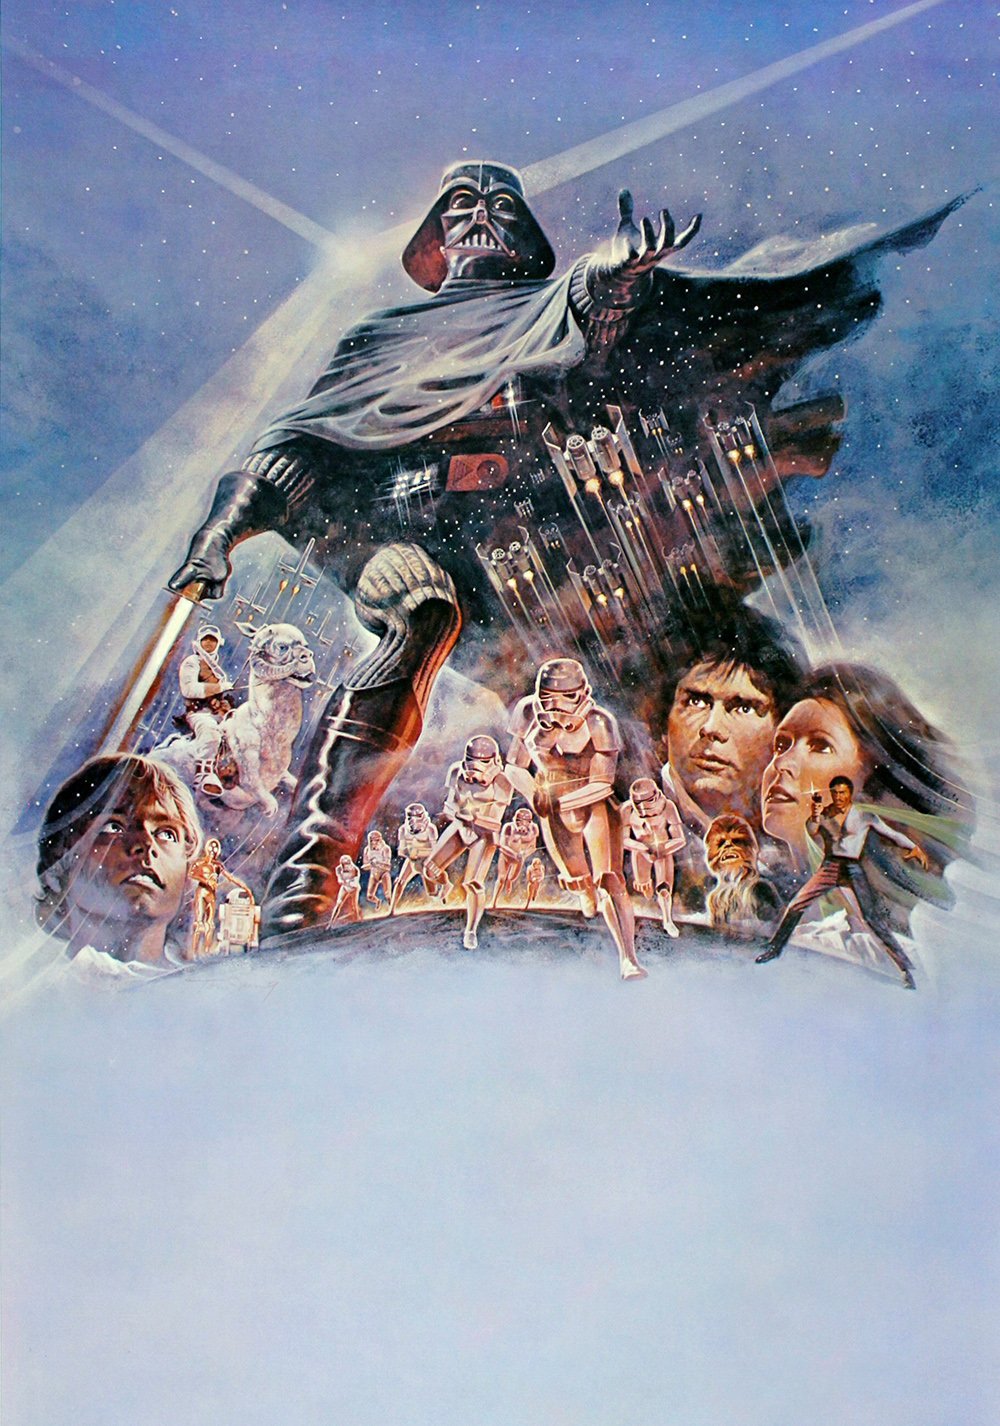 Star Wars Episode V The Empire Strikes Back Movie Poster ID 125291